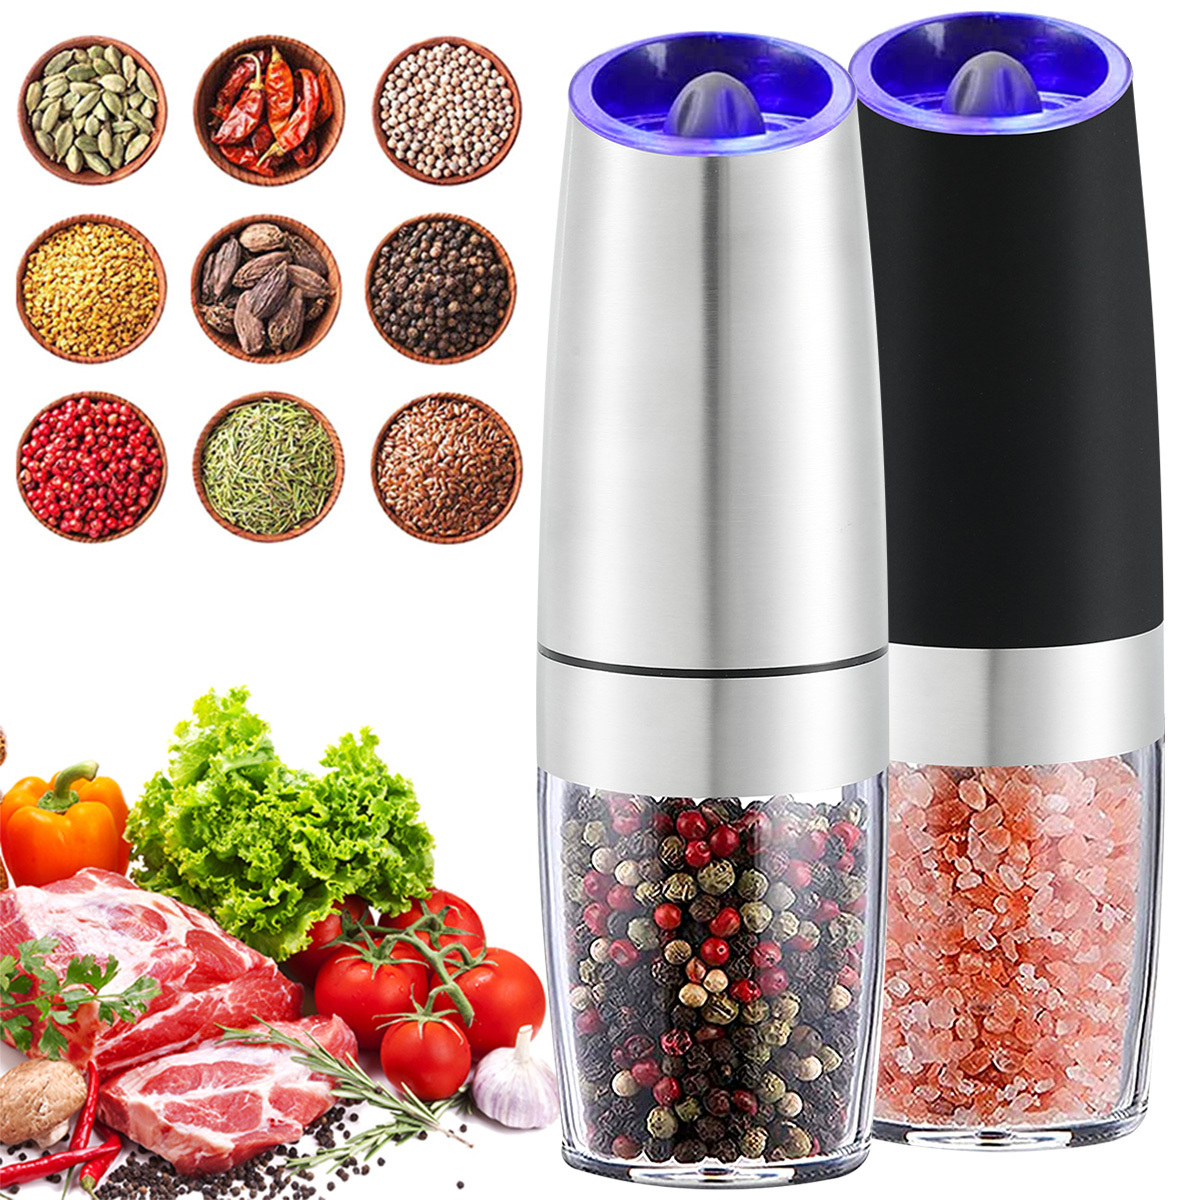 Electric Salt and Pepper Grinders Stainless Steel Automatic Gravity Herb Spice  Grinder Spice Grinder Kitchen Gadget